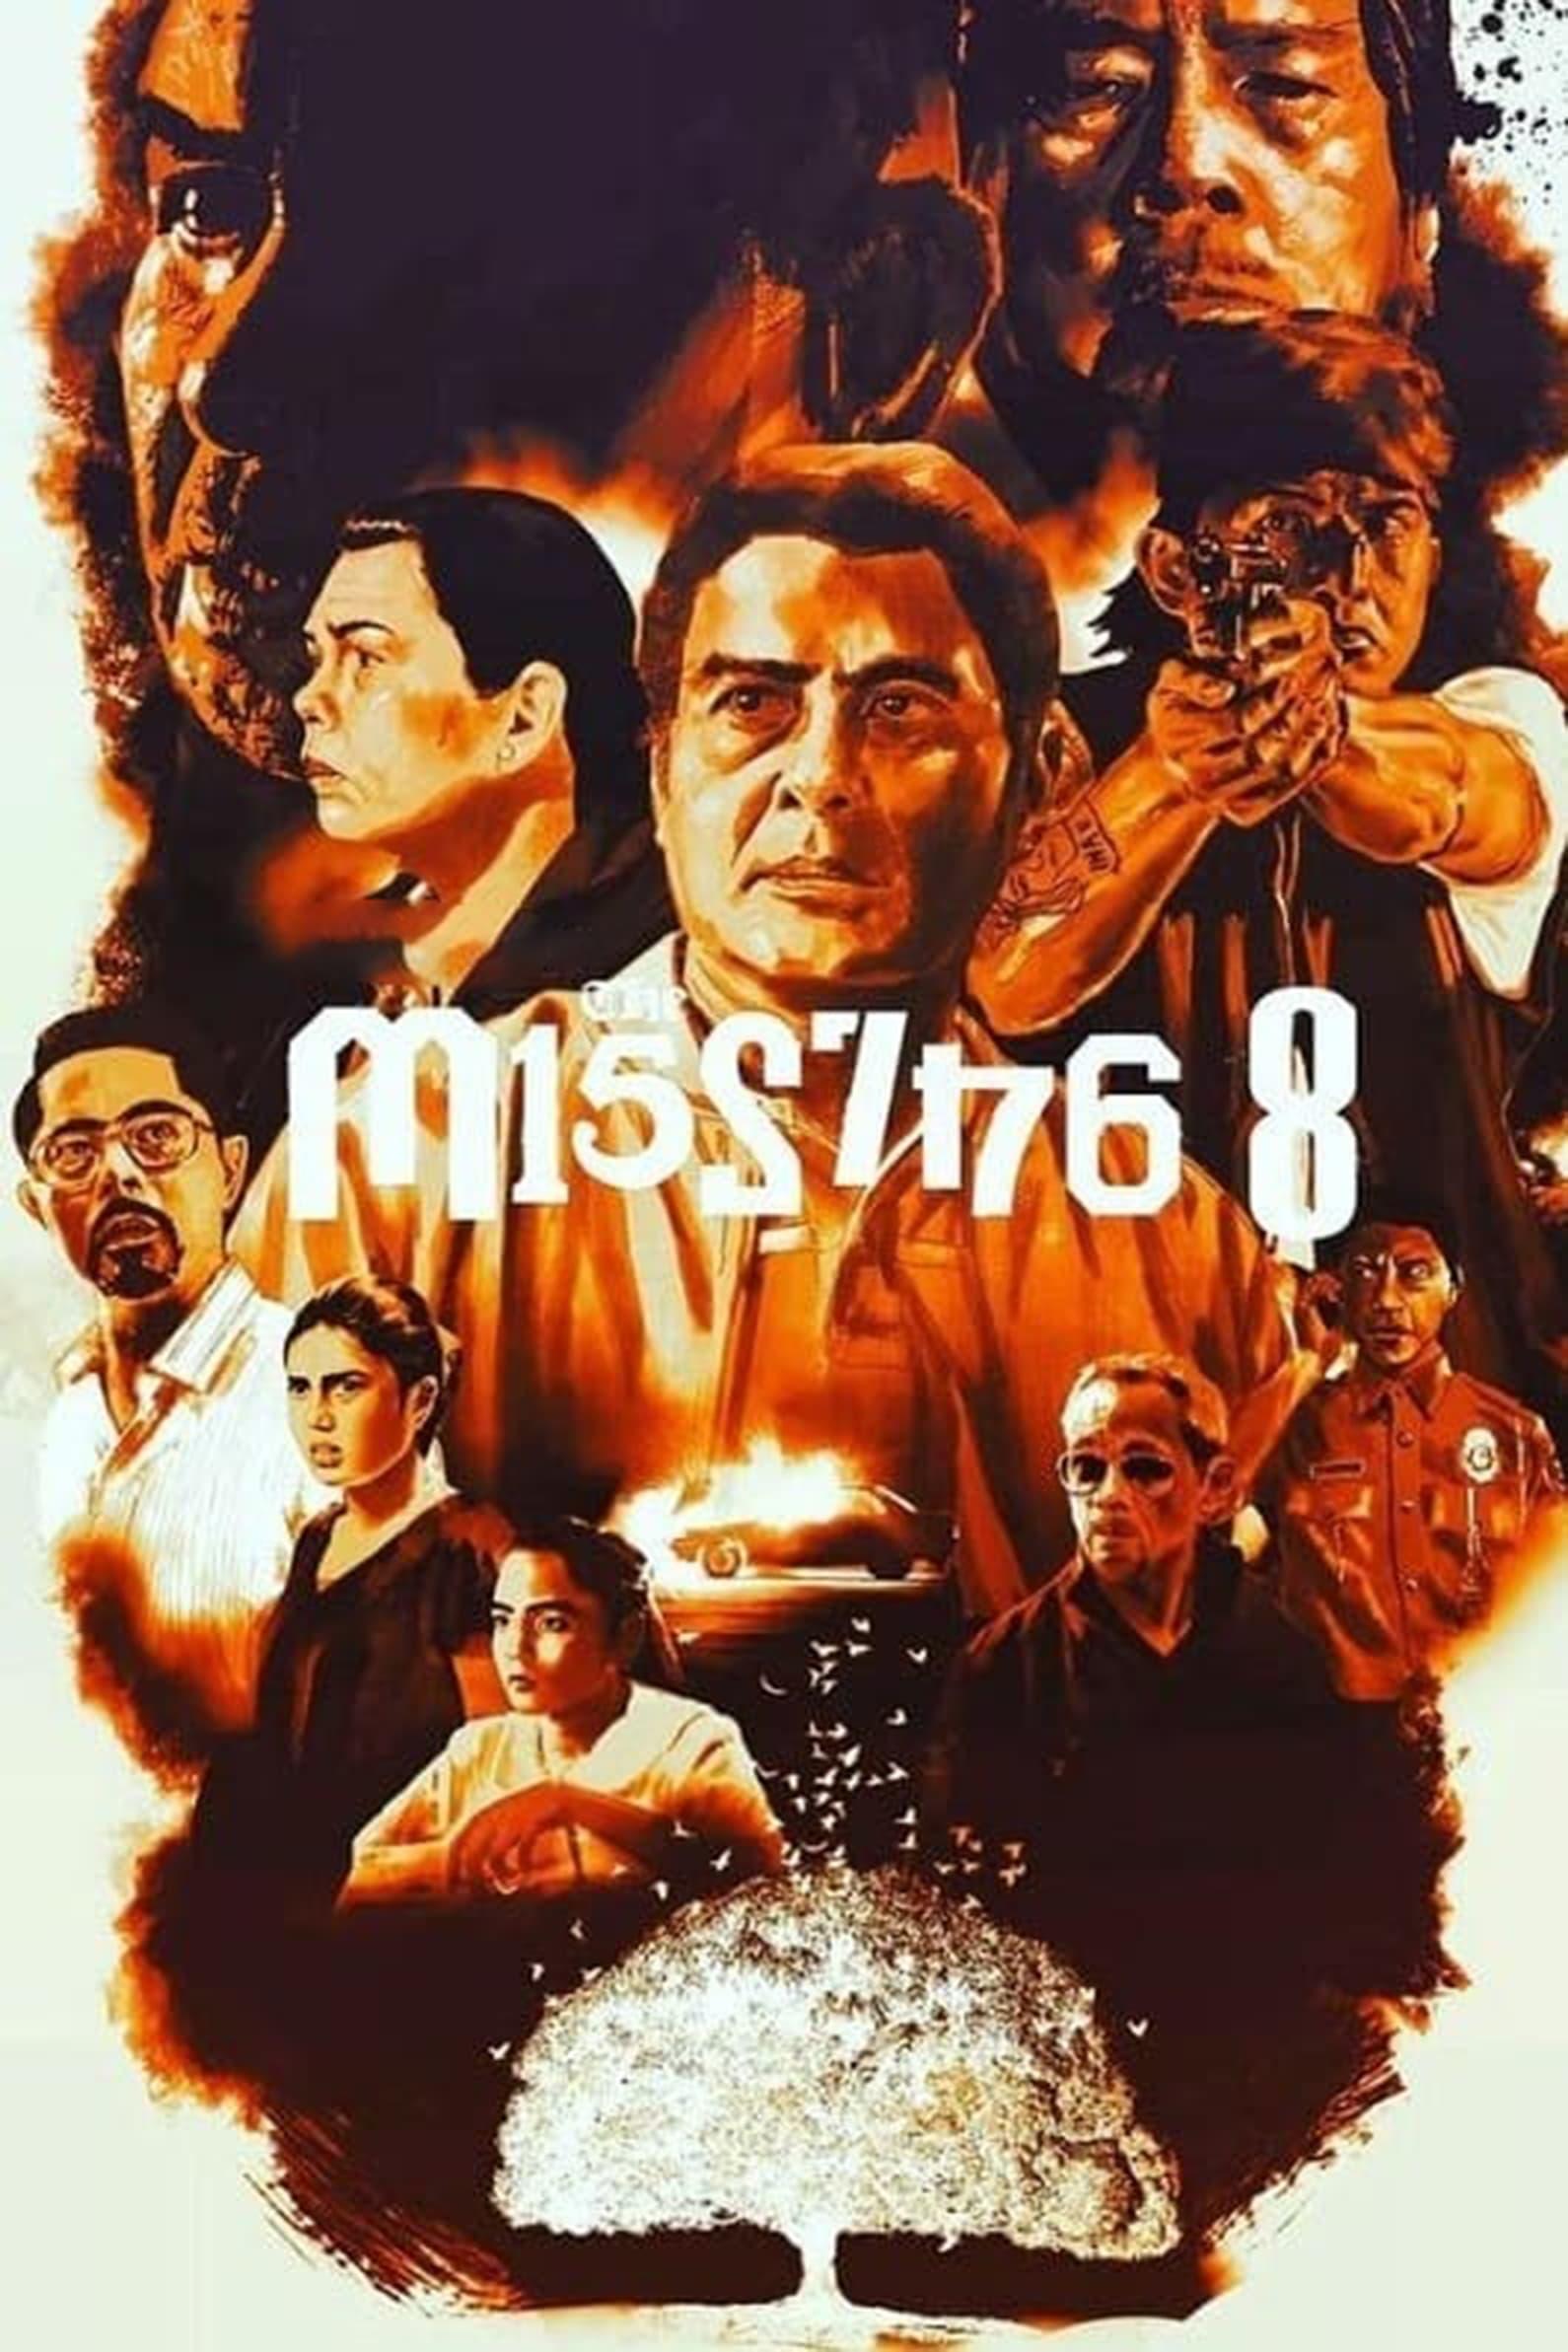 On the Job: The Missing 8 poster